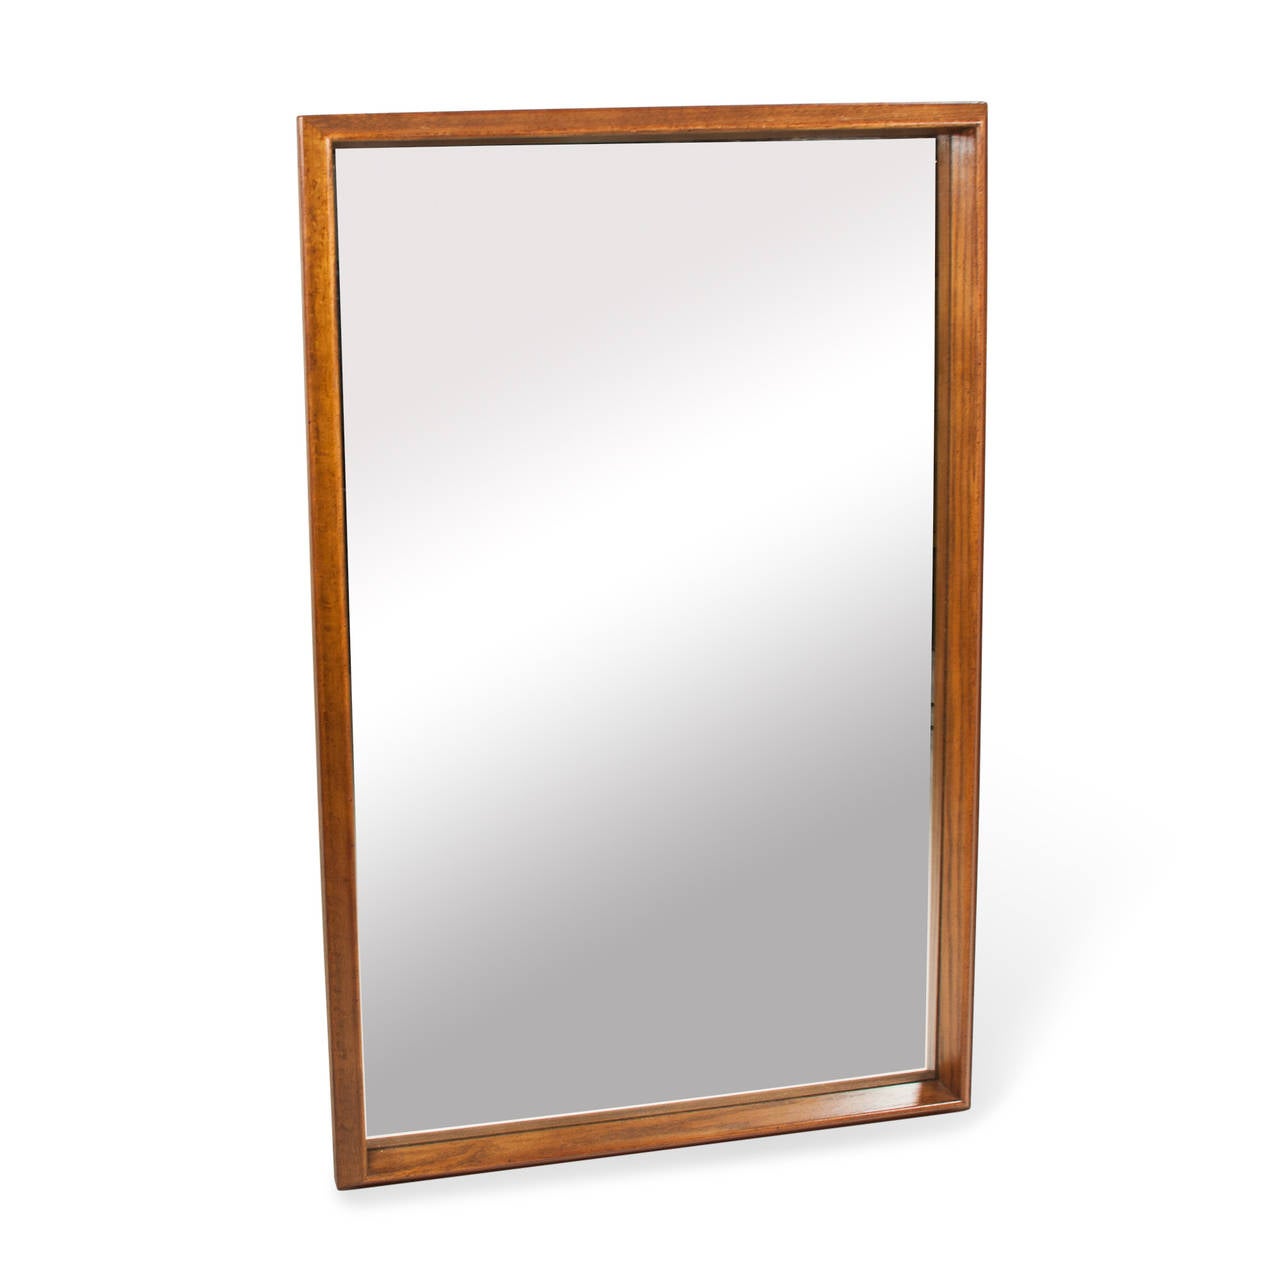 Deep frame rectangular mirror in dark stained maple, American, 1970s. 40 x 26 inches, depth 1 1/2 in.